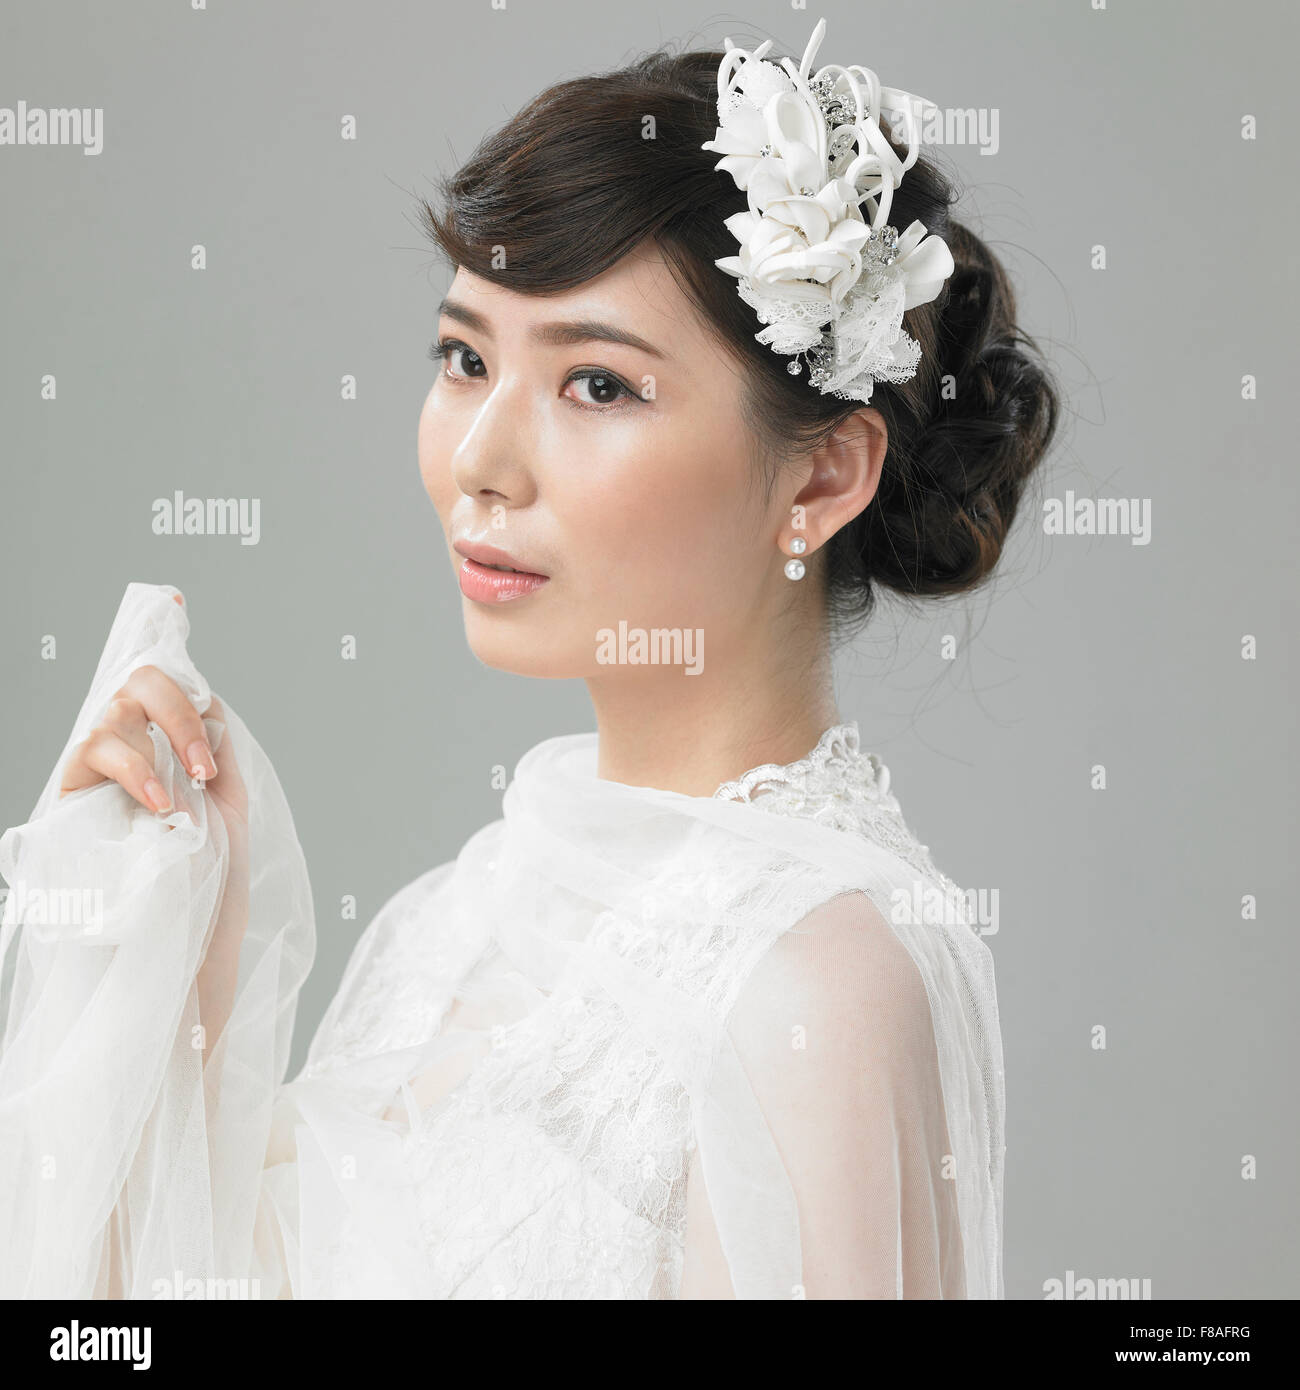 Woman in wedding dress being graceful Stock Photo